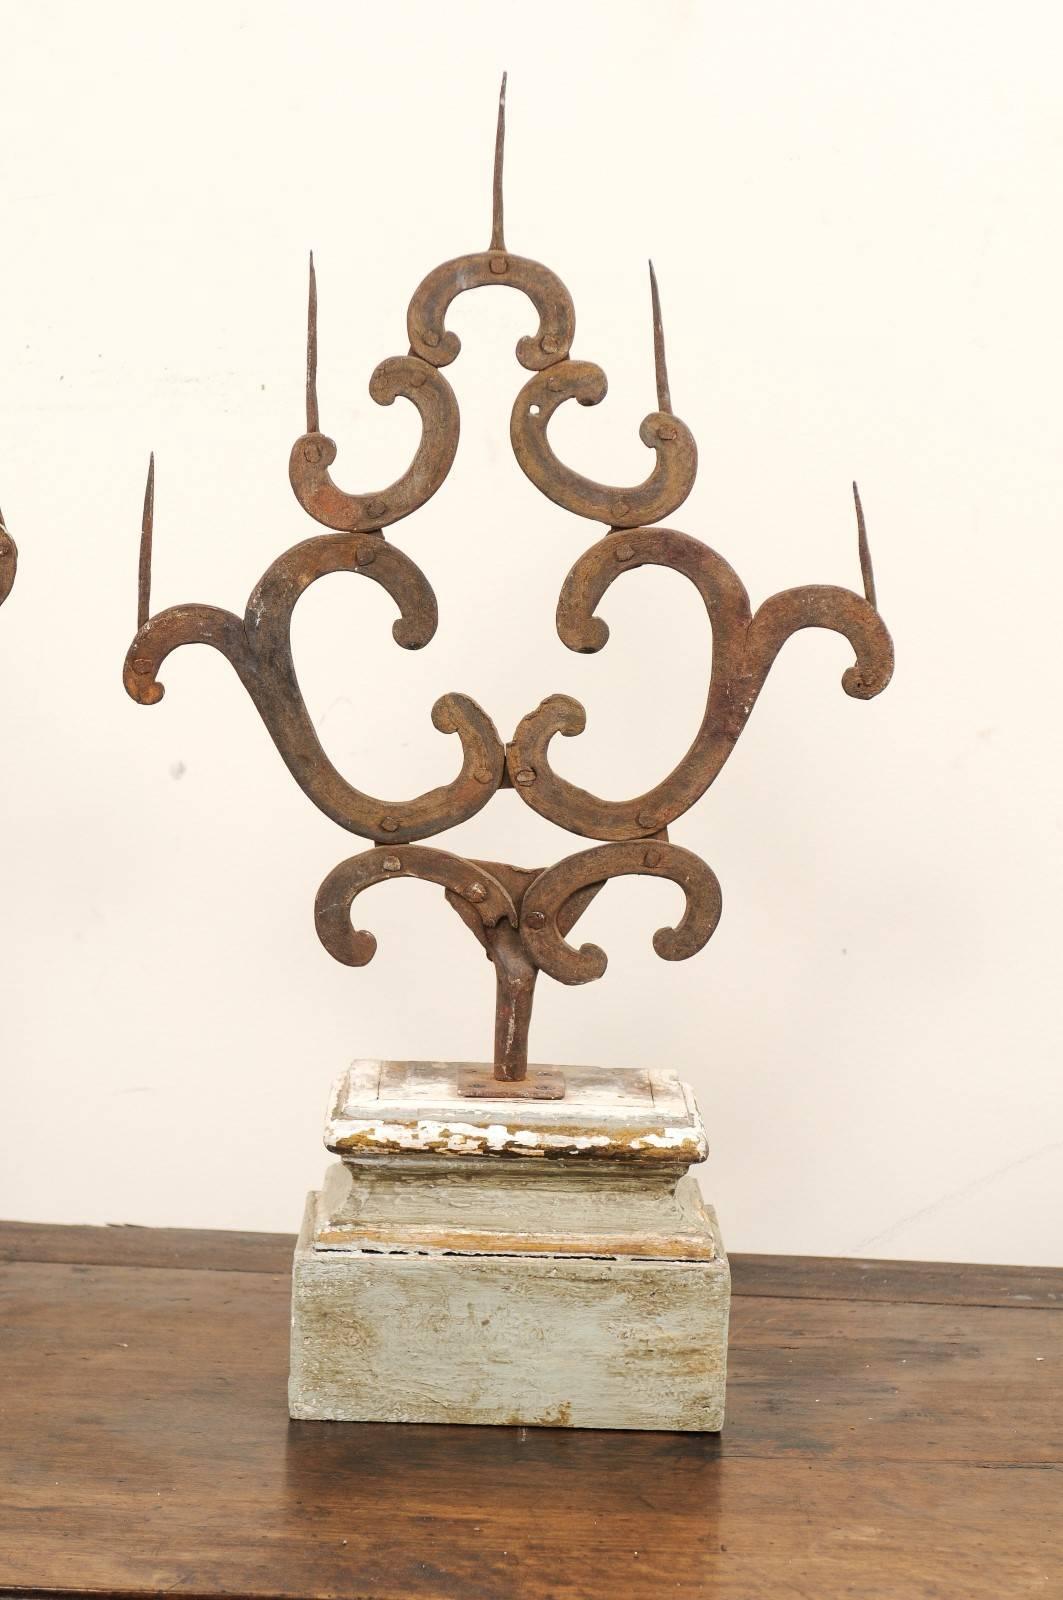 French Pair of 18th Century Italian Hand-Forged Iron Prickets Mounted on Painted Wood